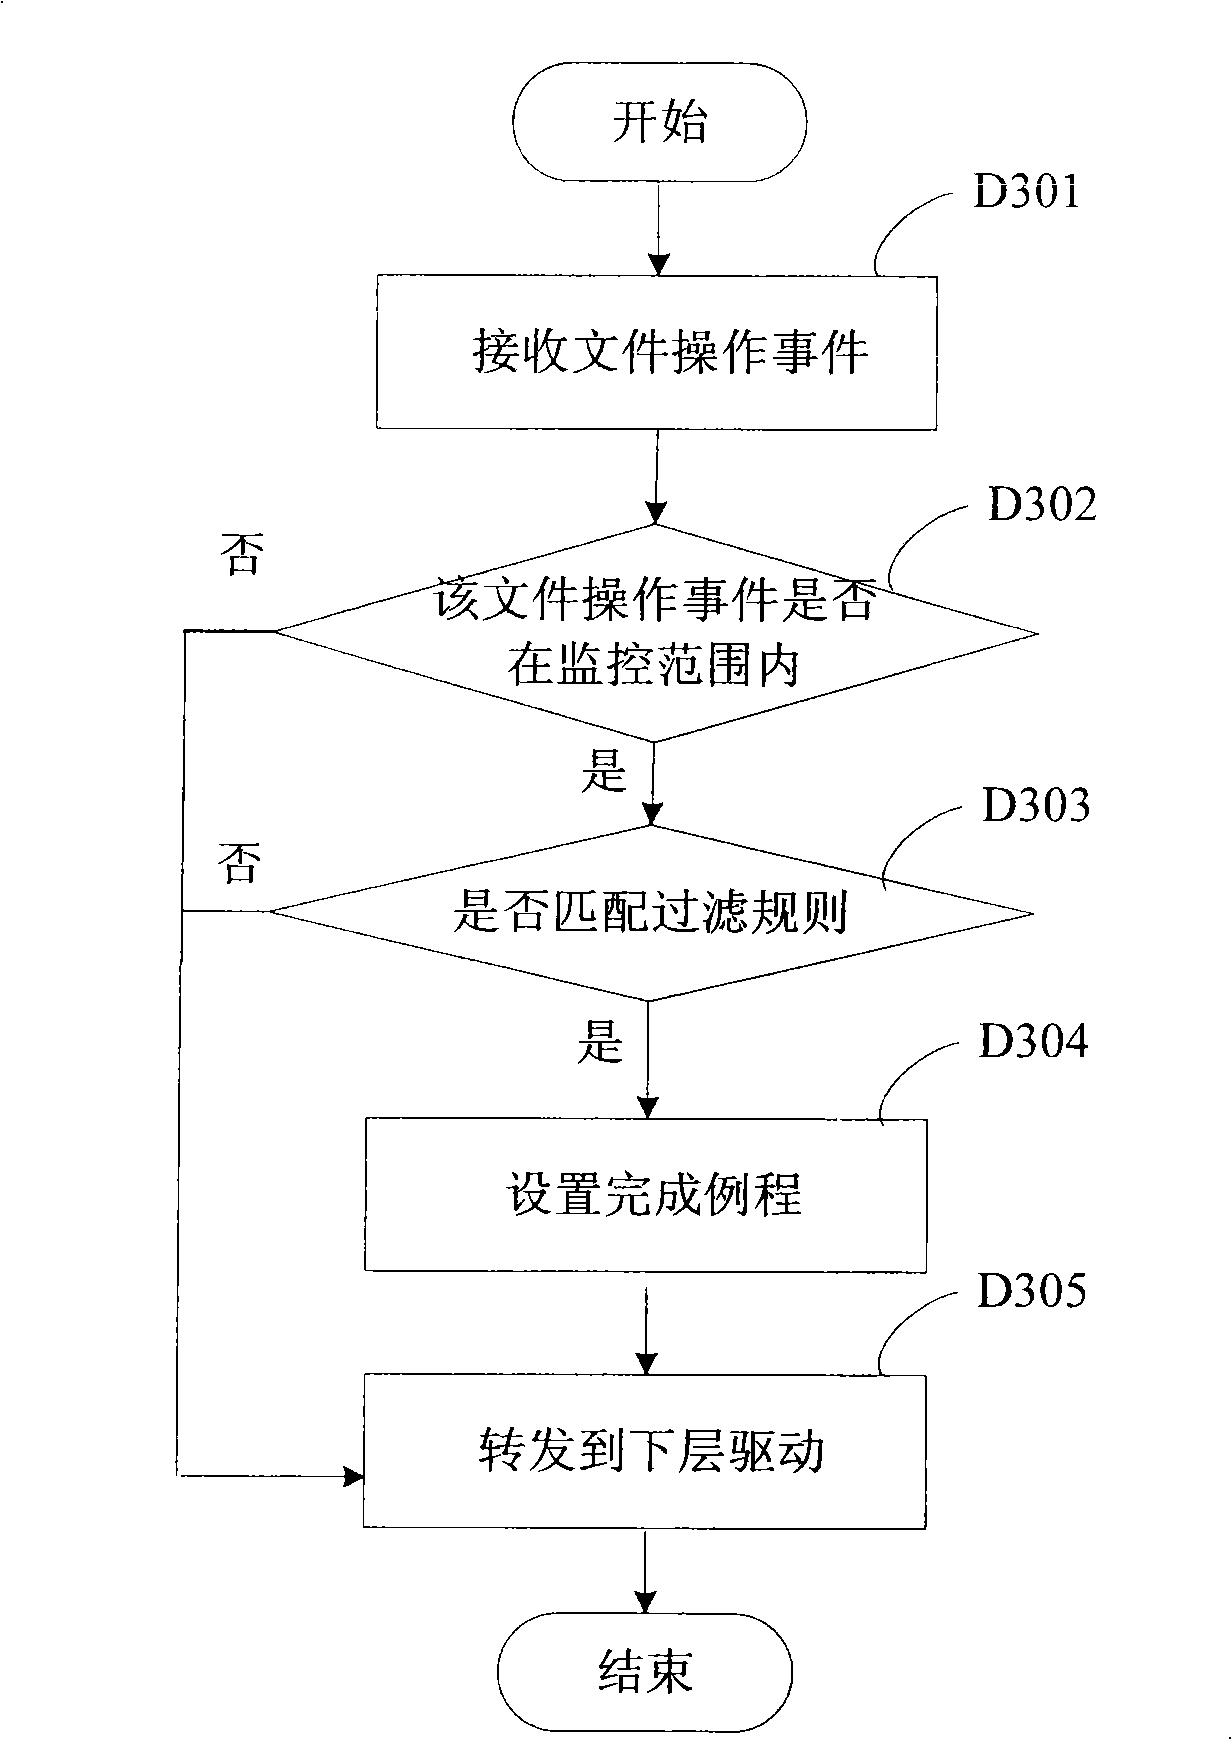 File back-up system and method of computer system